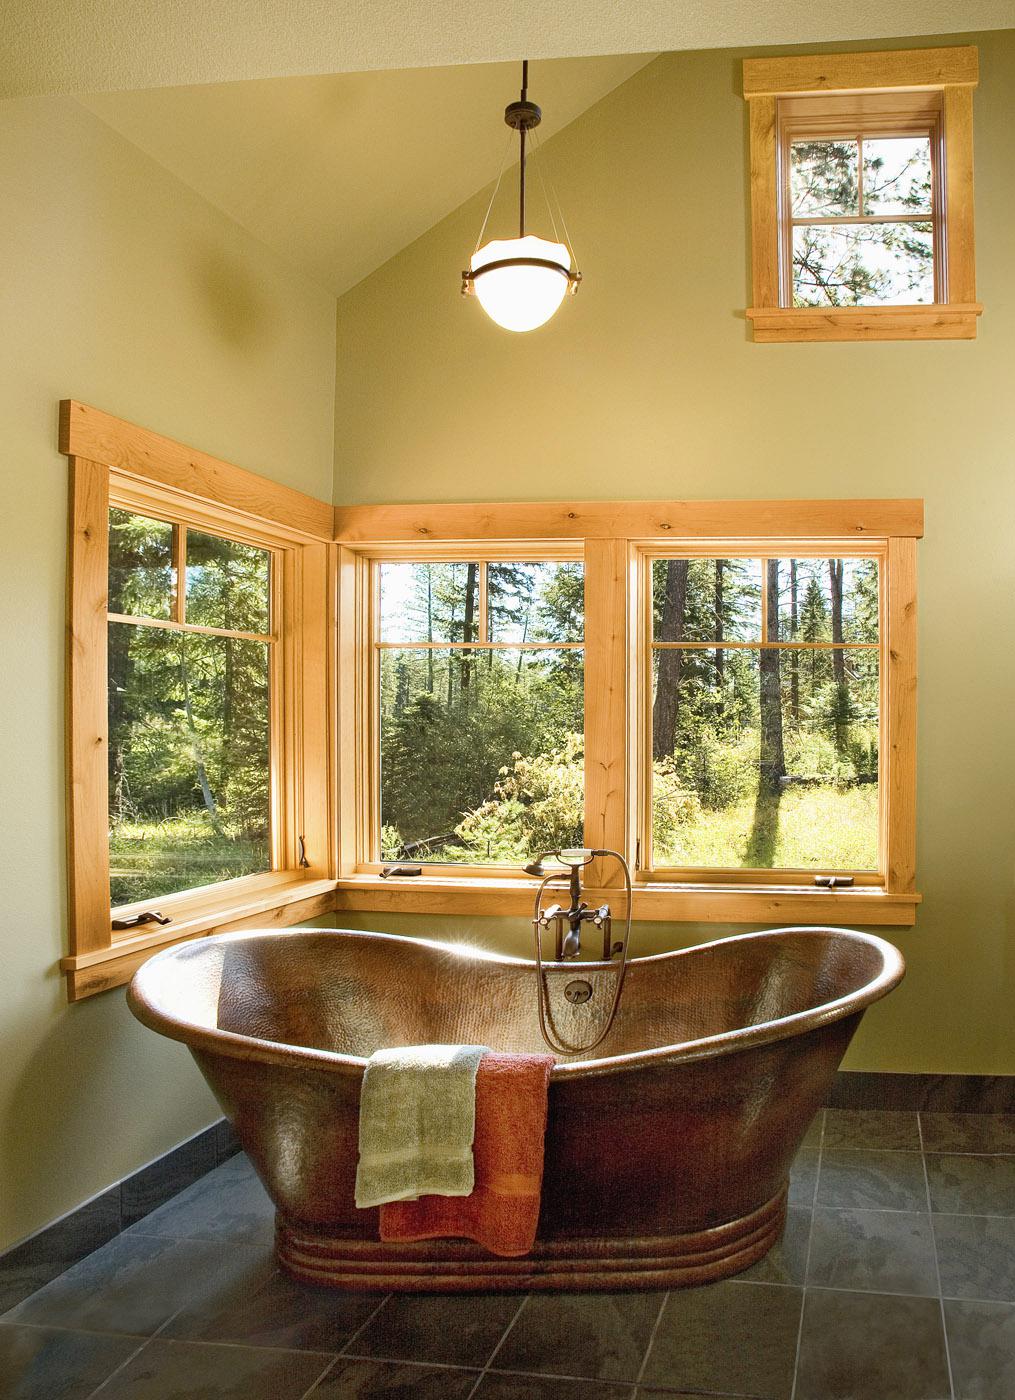 Forest certification indicates that forests have passed certain evaluations to ensure the more sustainable production of consumptive and non-consumptive forest products. Jeld-Wen, manufacturer of windows and doors, offers certification for their many products, including the ones pictured here. (Photo courtesy of Jeld-Wen)